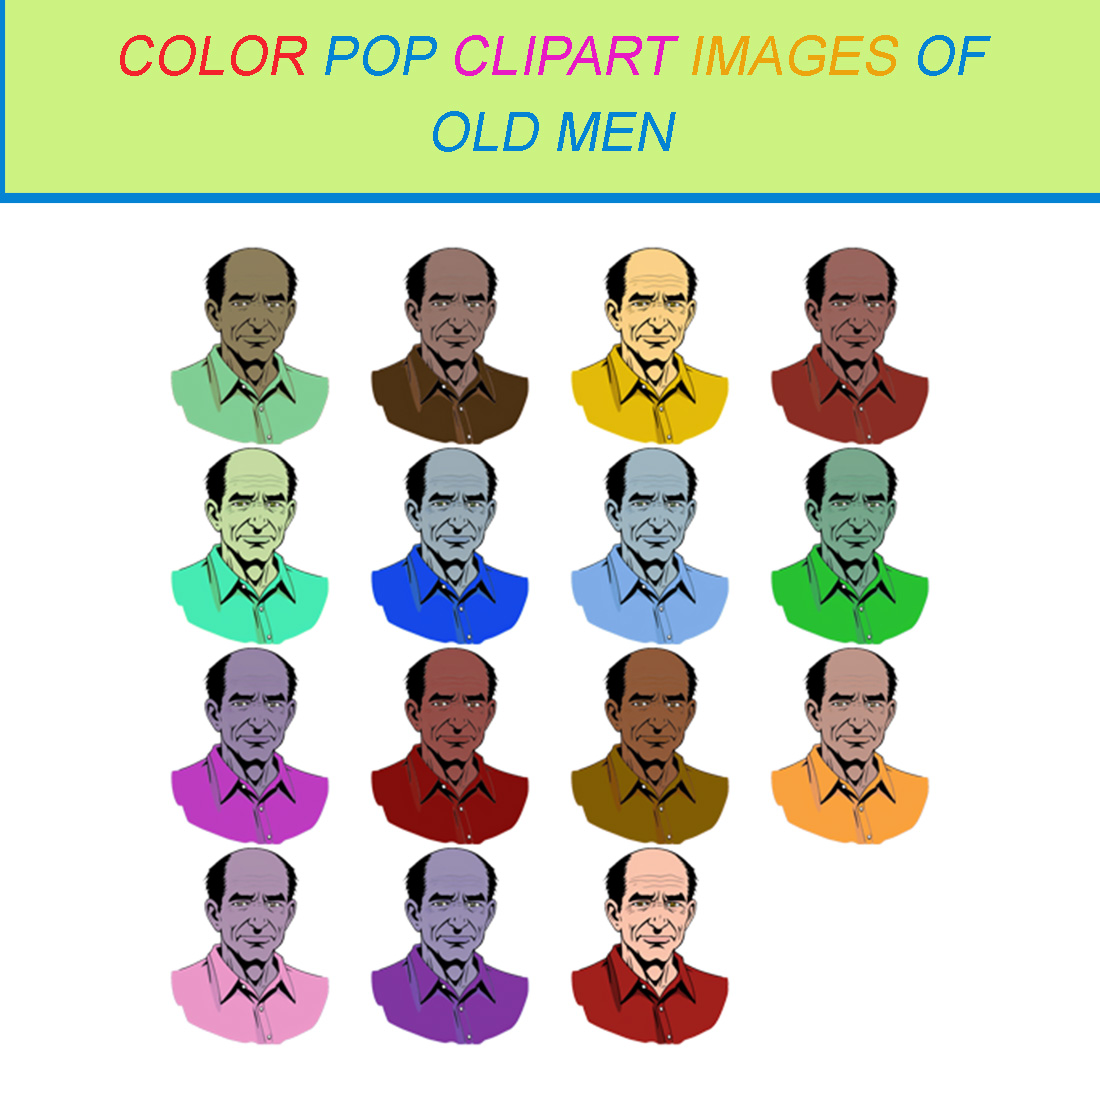 15 COLOR POP CLIPART IMAGES OF OLD MEN cover image.